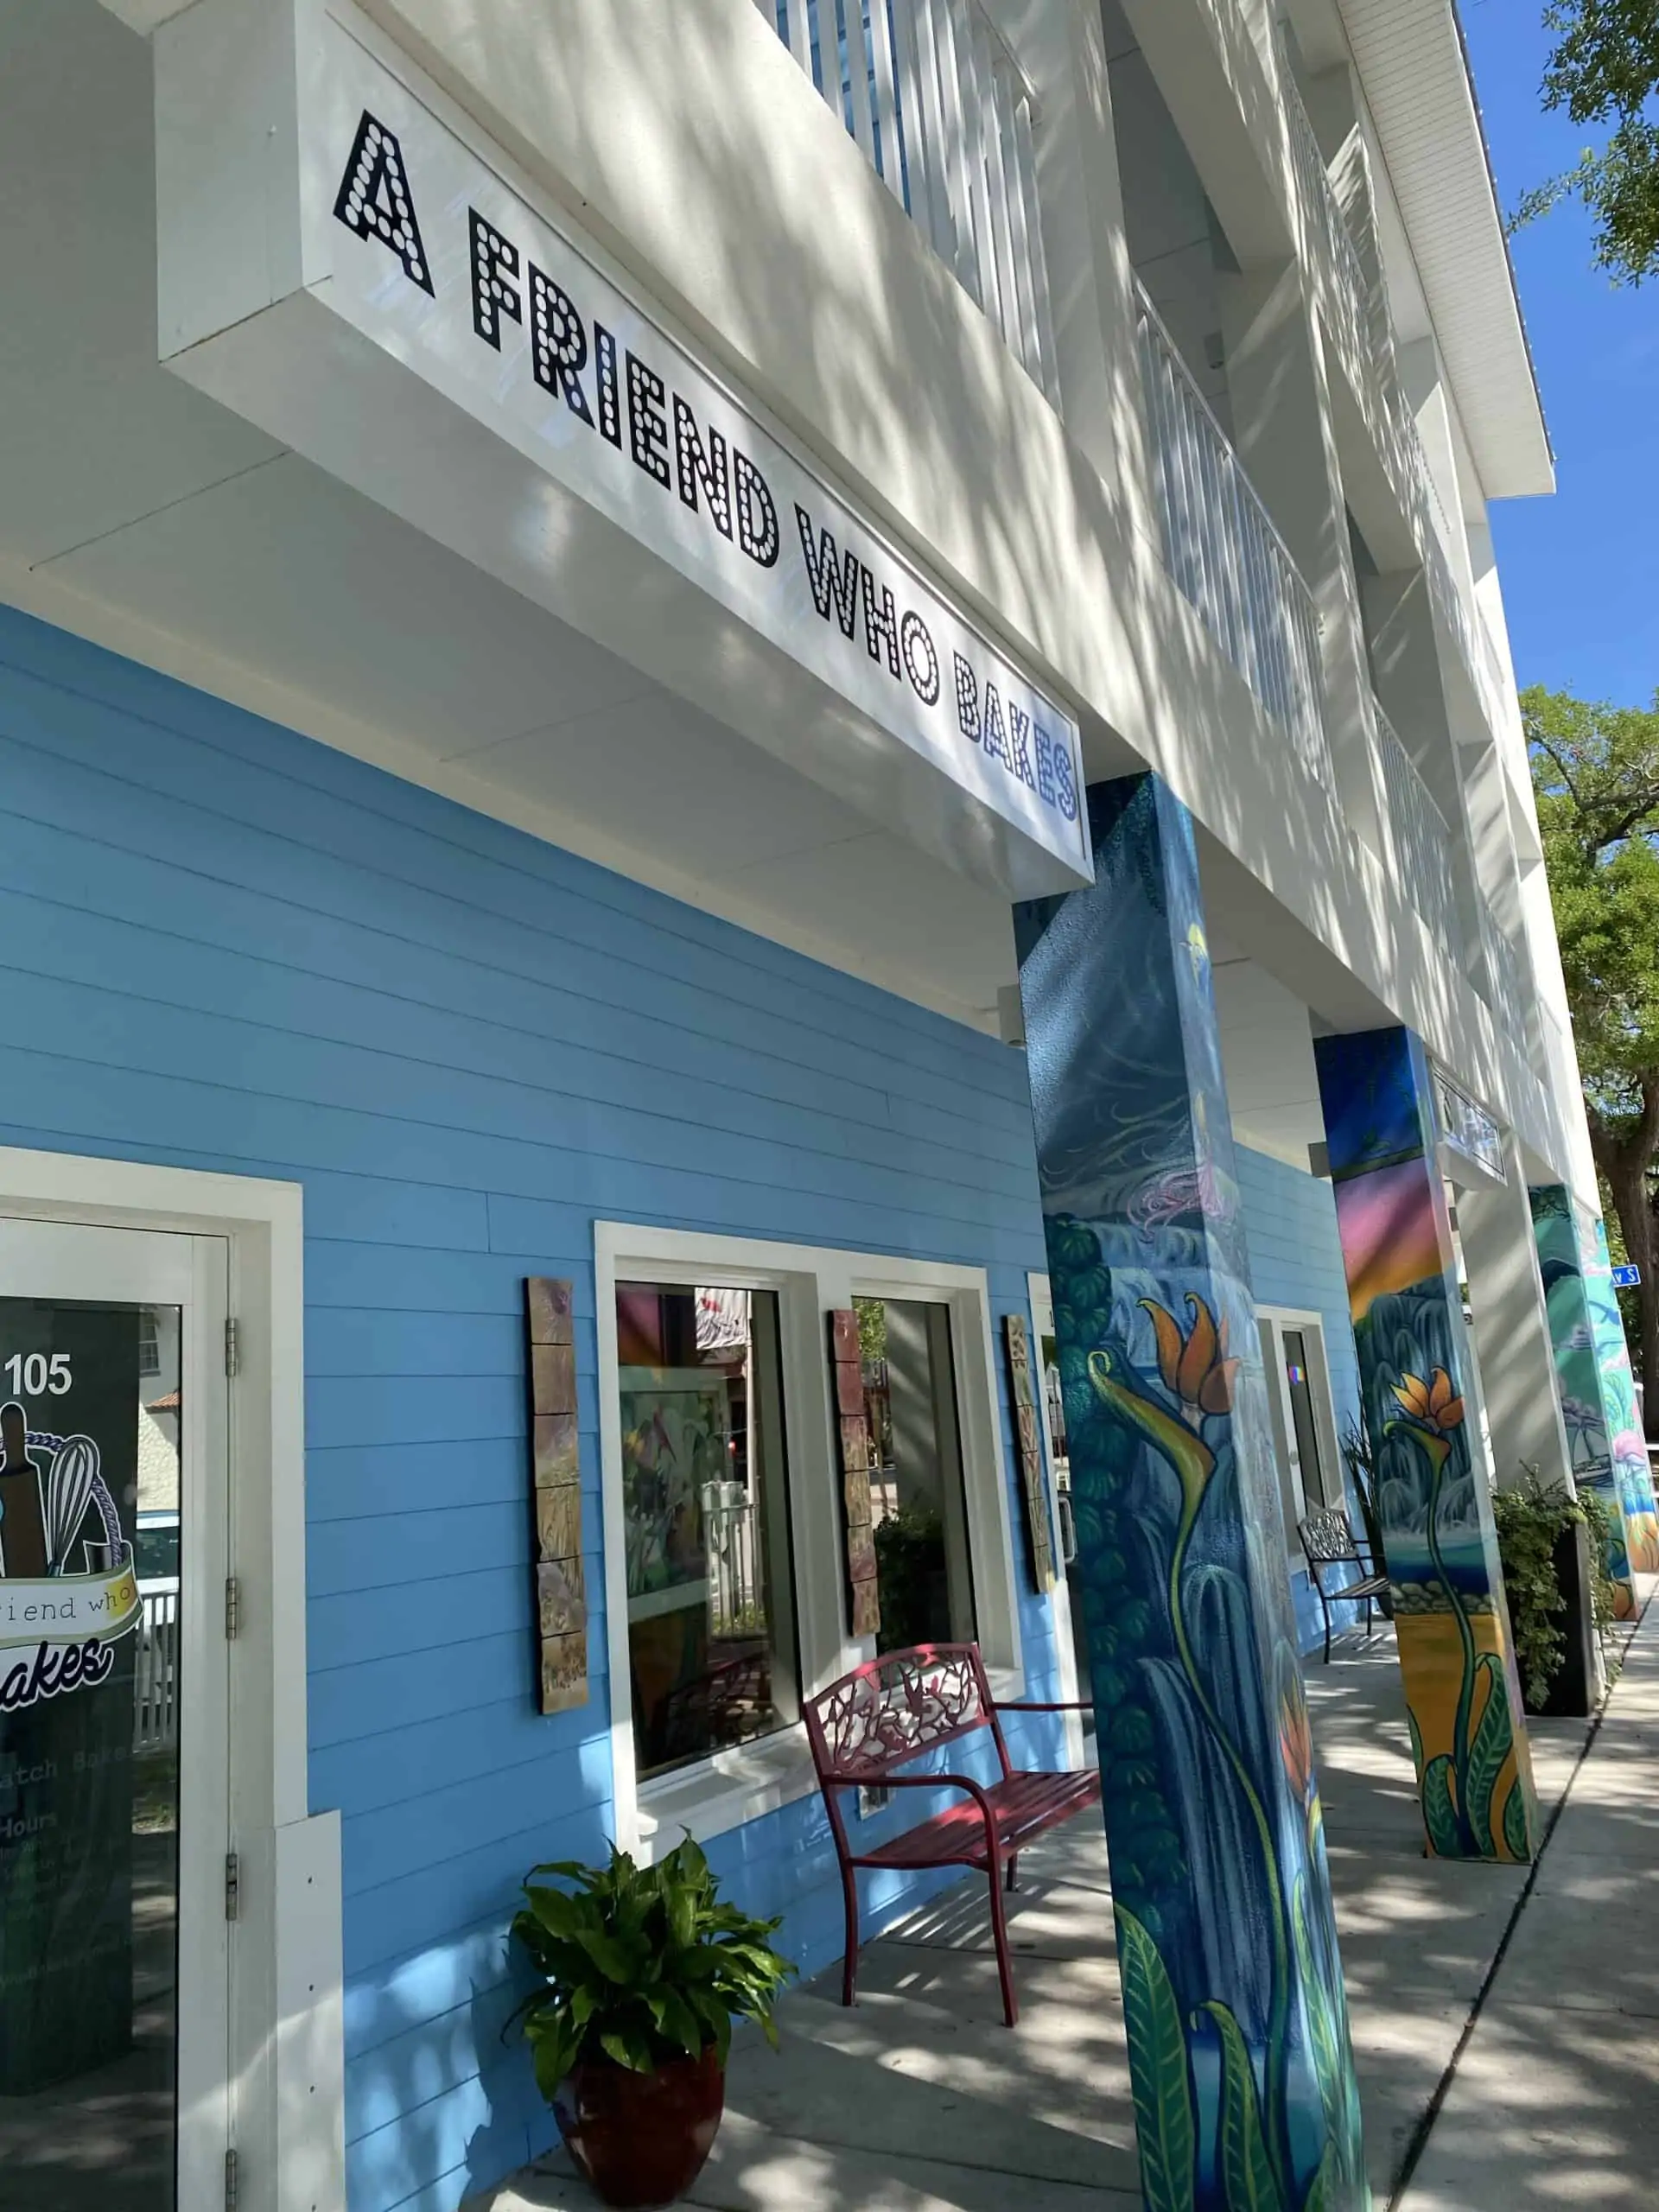 A friend who bakes business exterior is a cute blue building in the heart of downtown Gulfport Florida